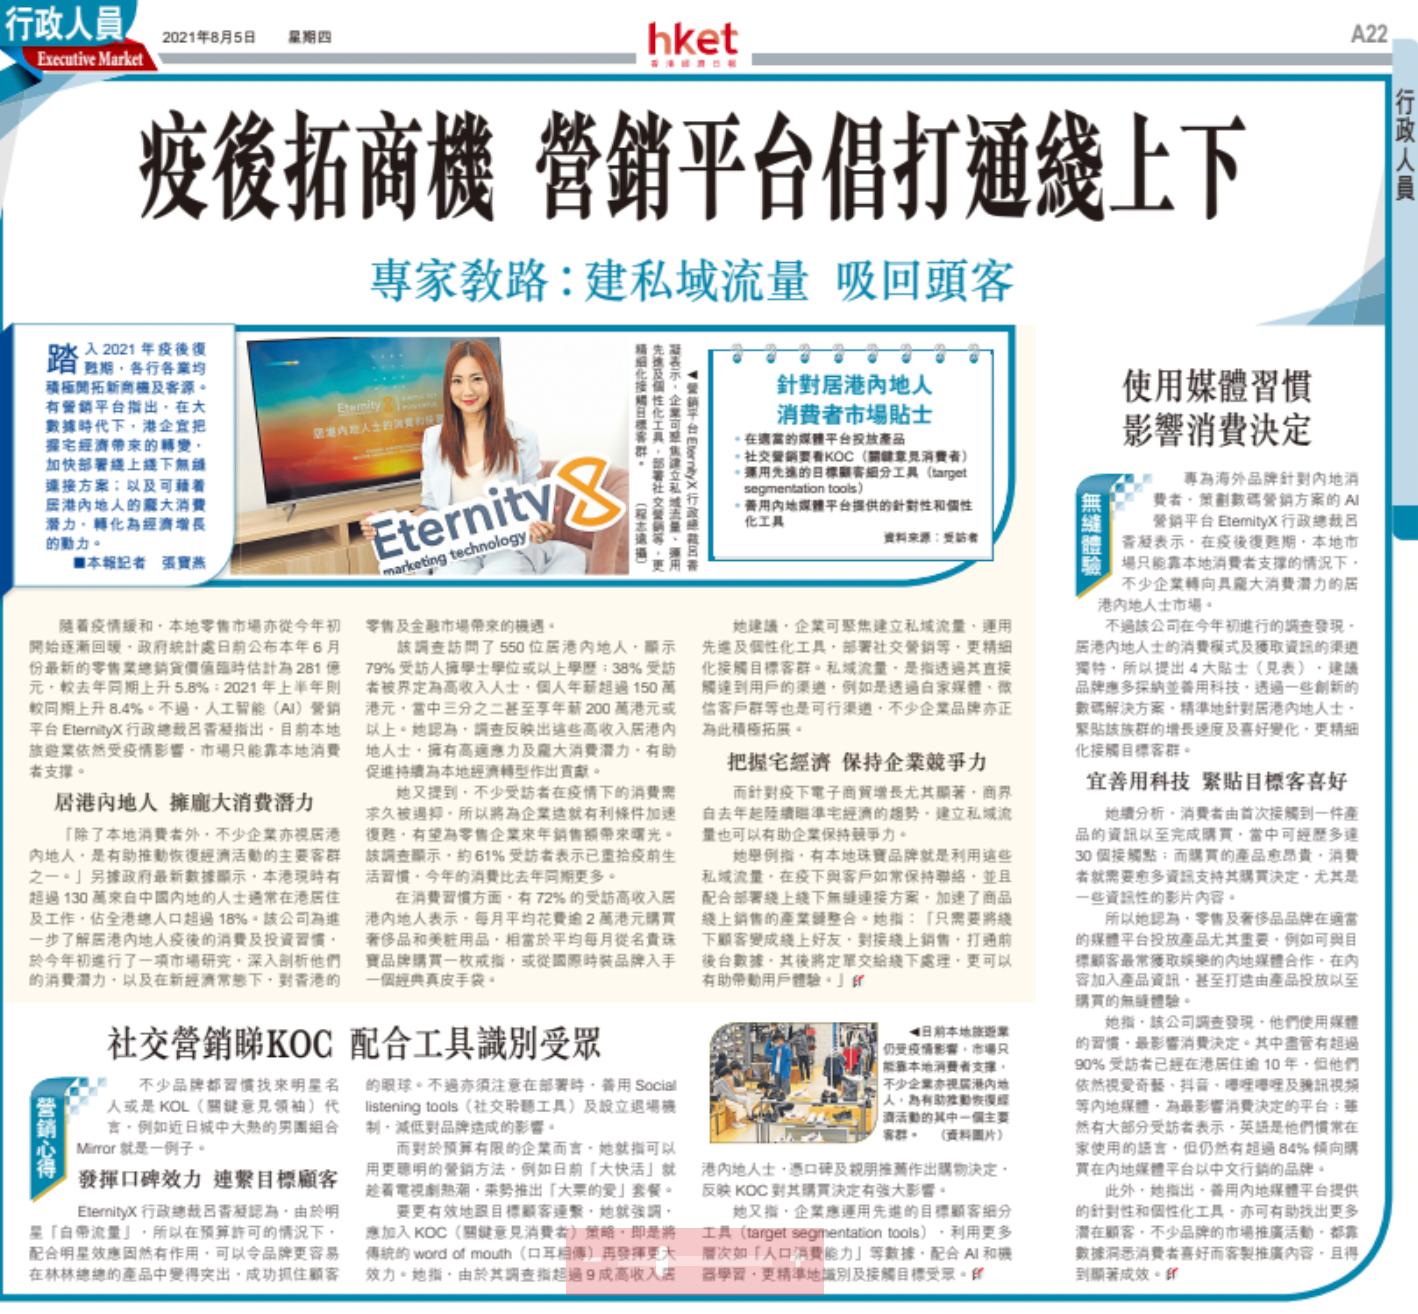 HKET Article - Private Traffic and Chinese Expats